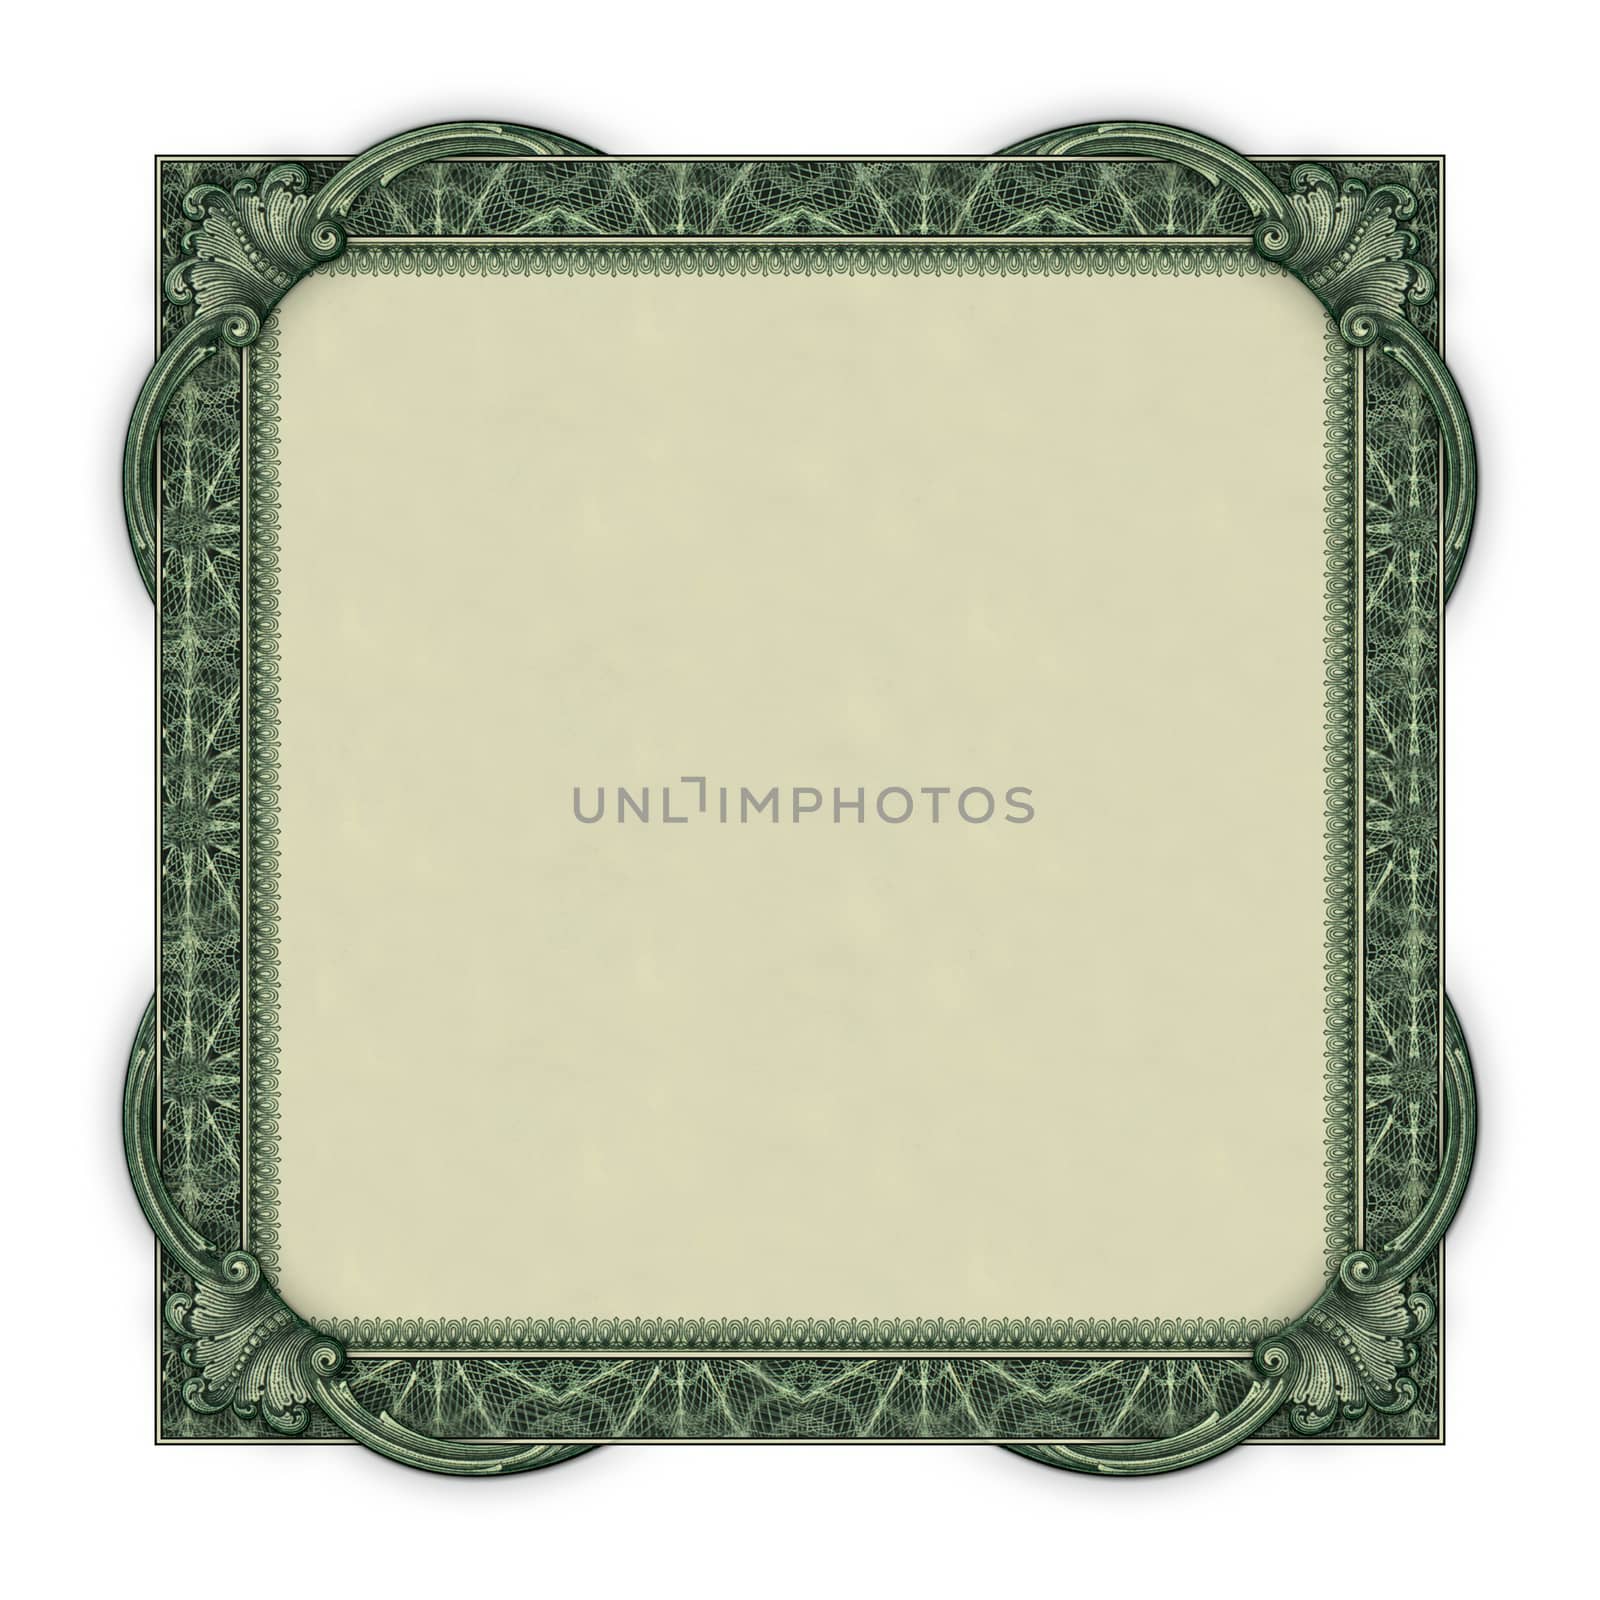 Photo-illustration of a border/frame using elements from a dollar bill.